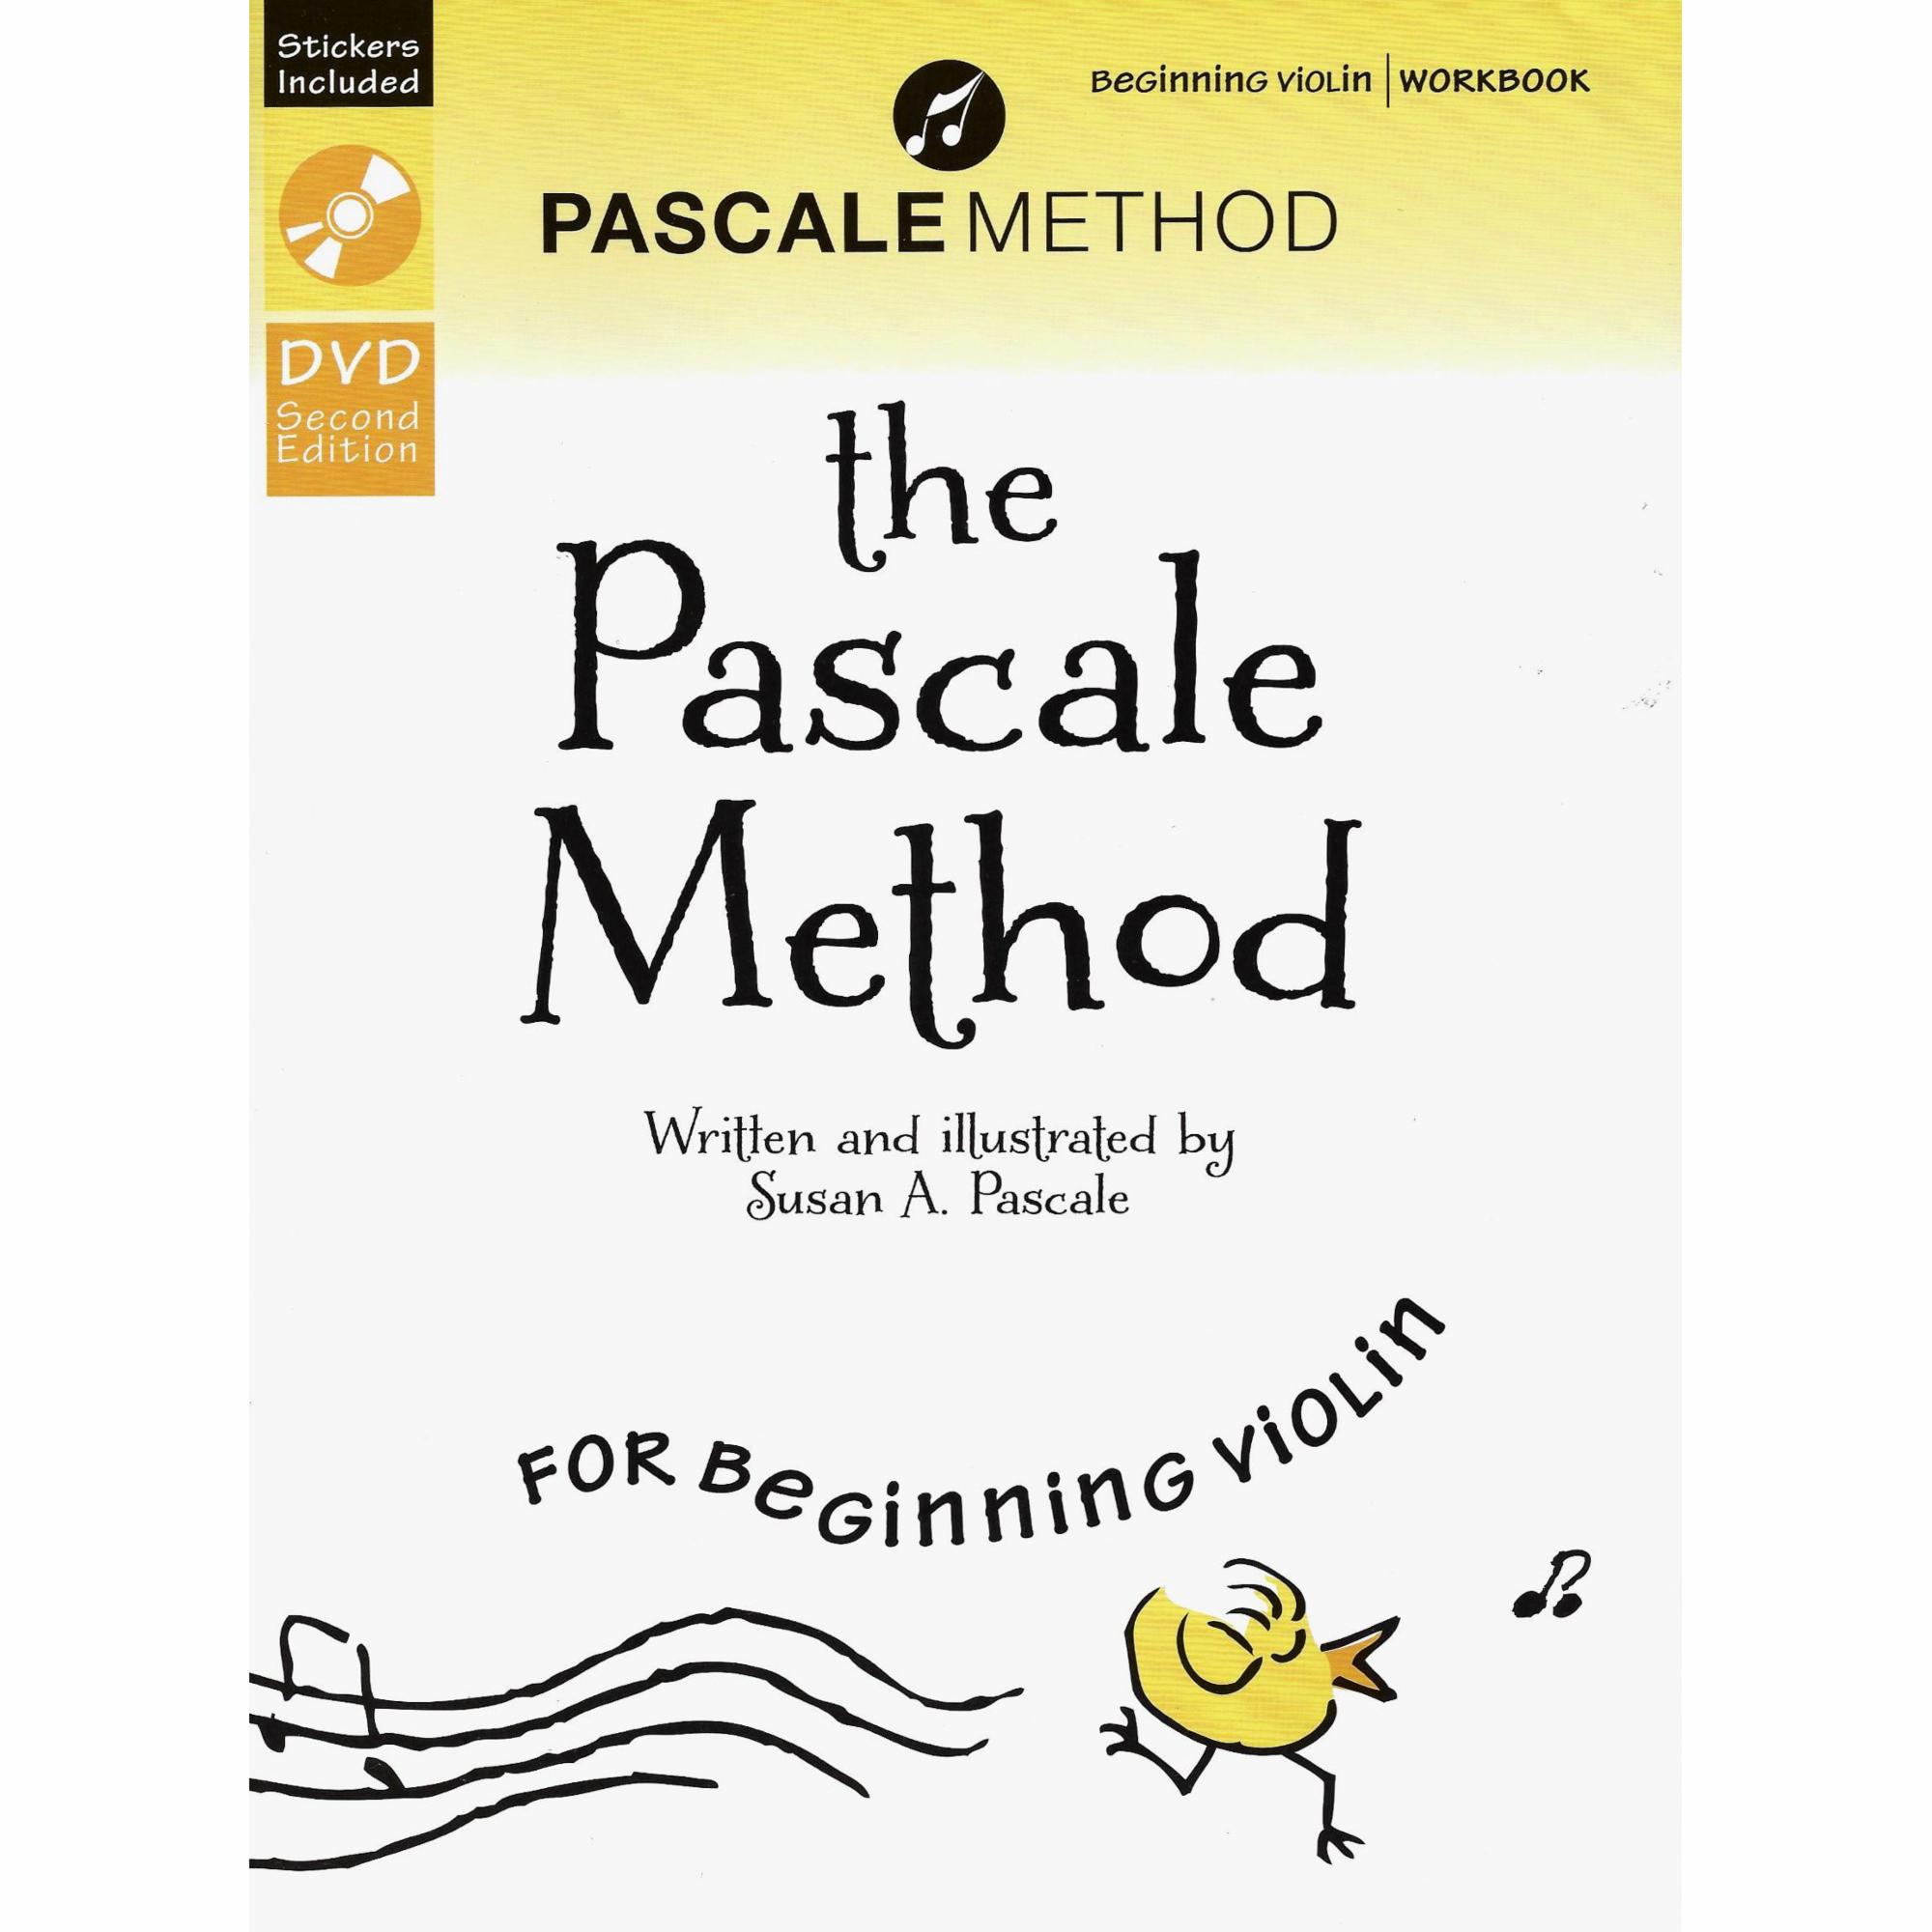 The Pascale Method for Beginning Violin